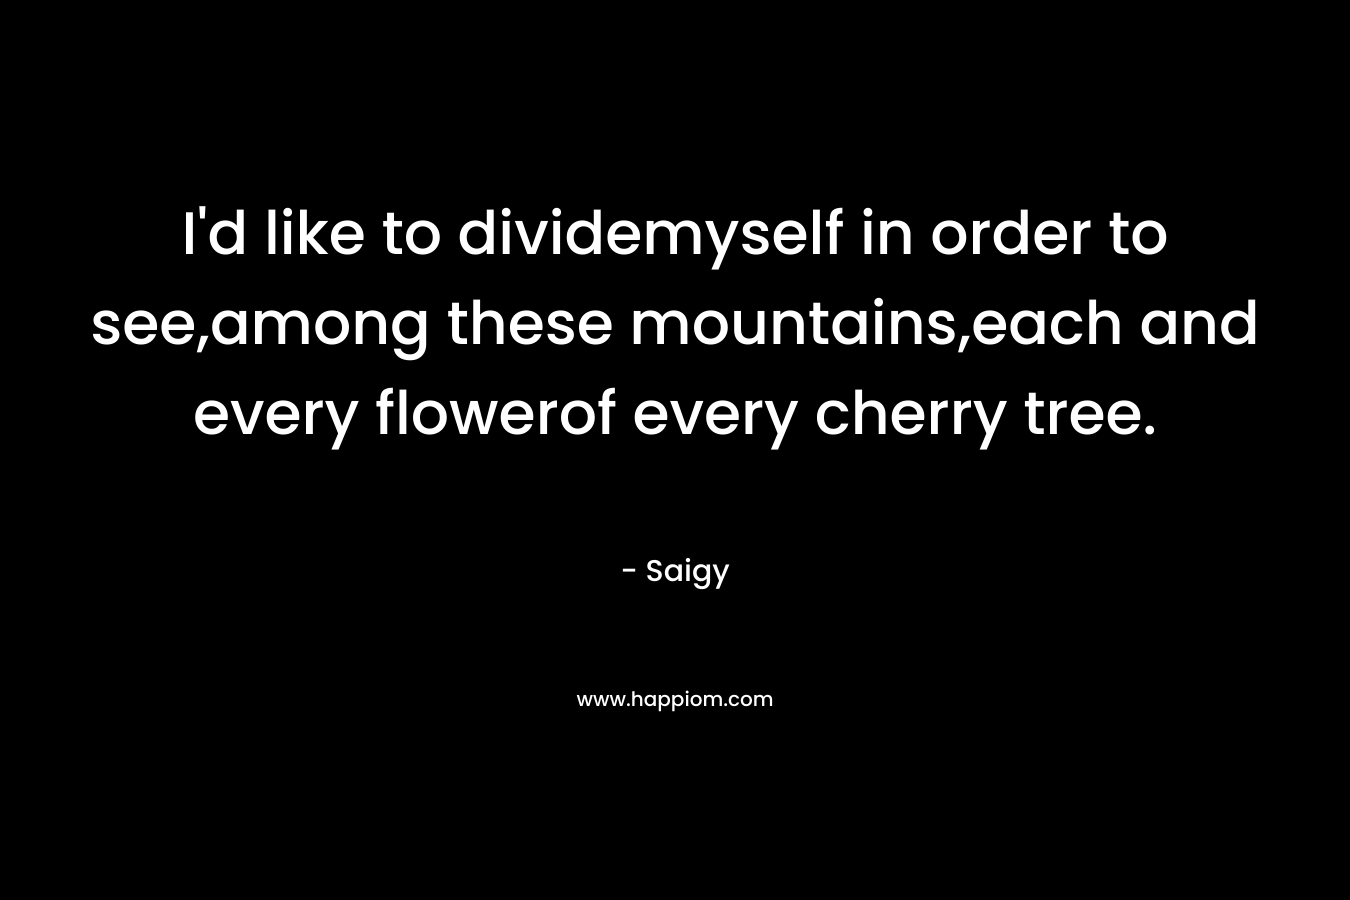 I’d like to dividemyself in order to see,among these mountains,each and every flowerof every cherry tree. – Saigy